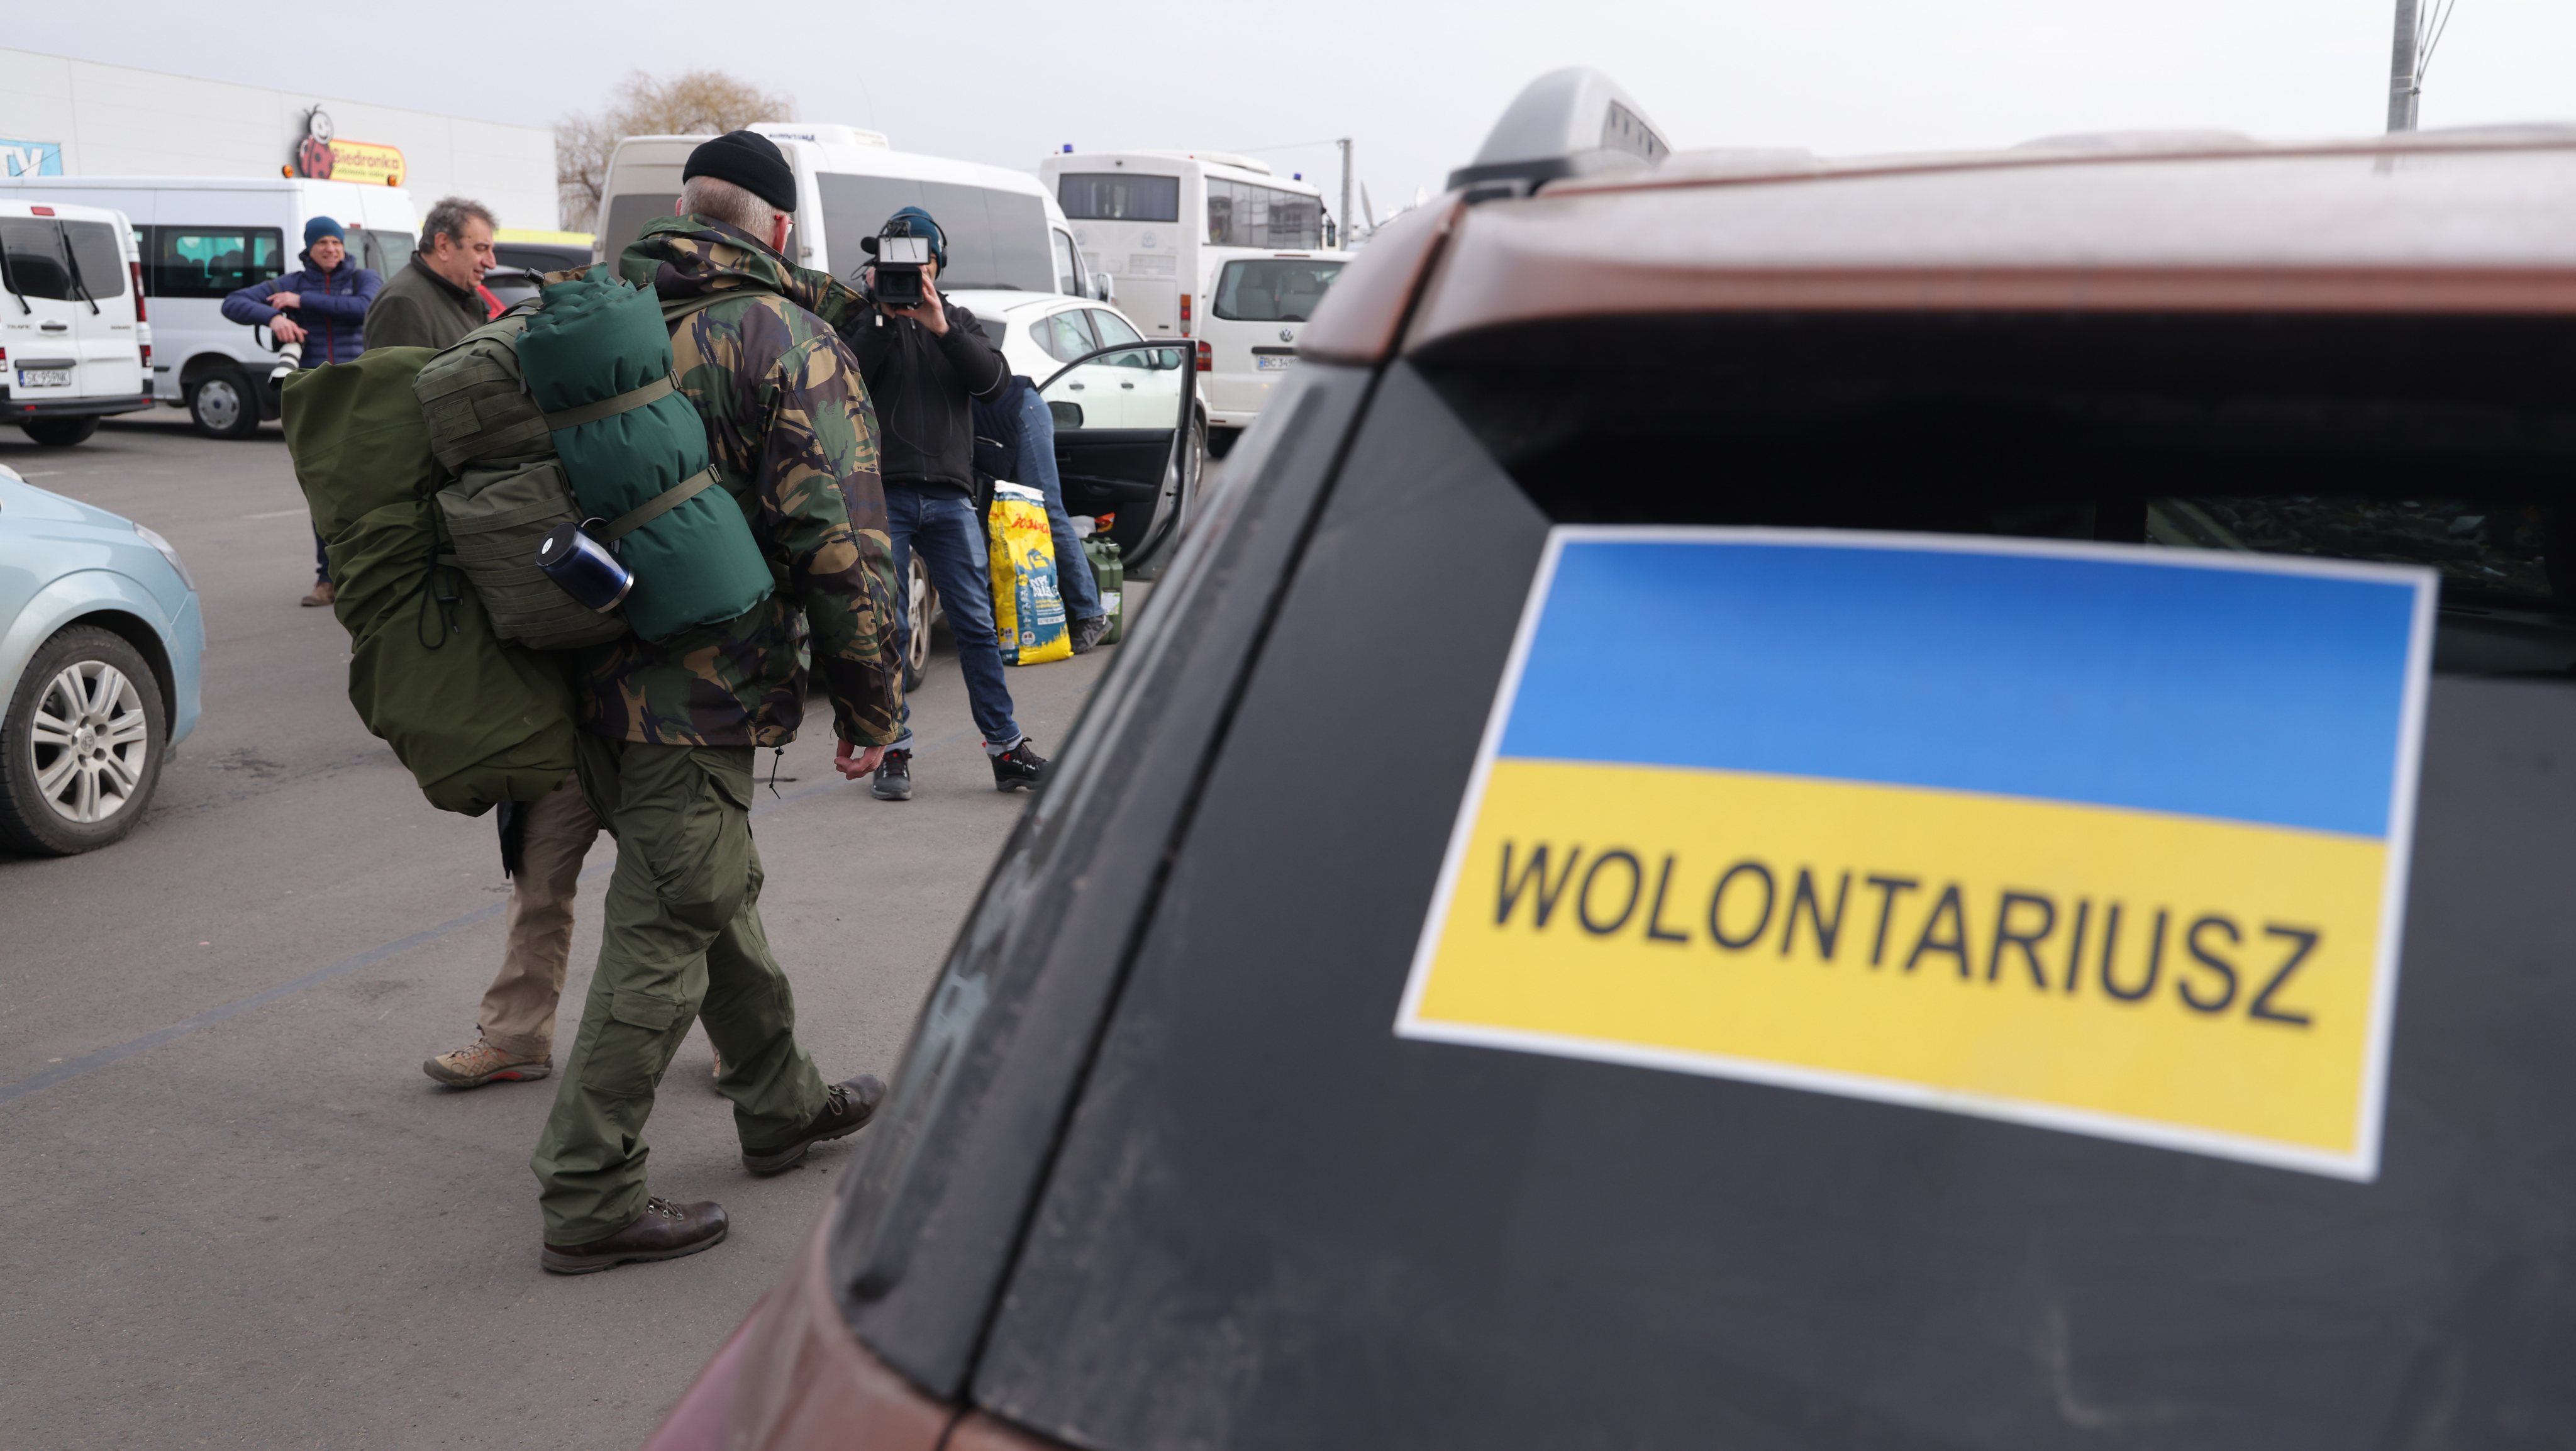 International Volunteers Take Up Arms And Head To Ukraine To Bolster Its Defense